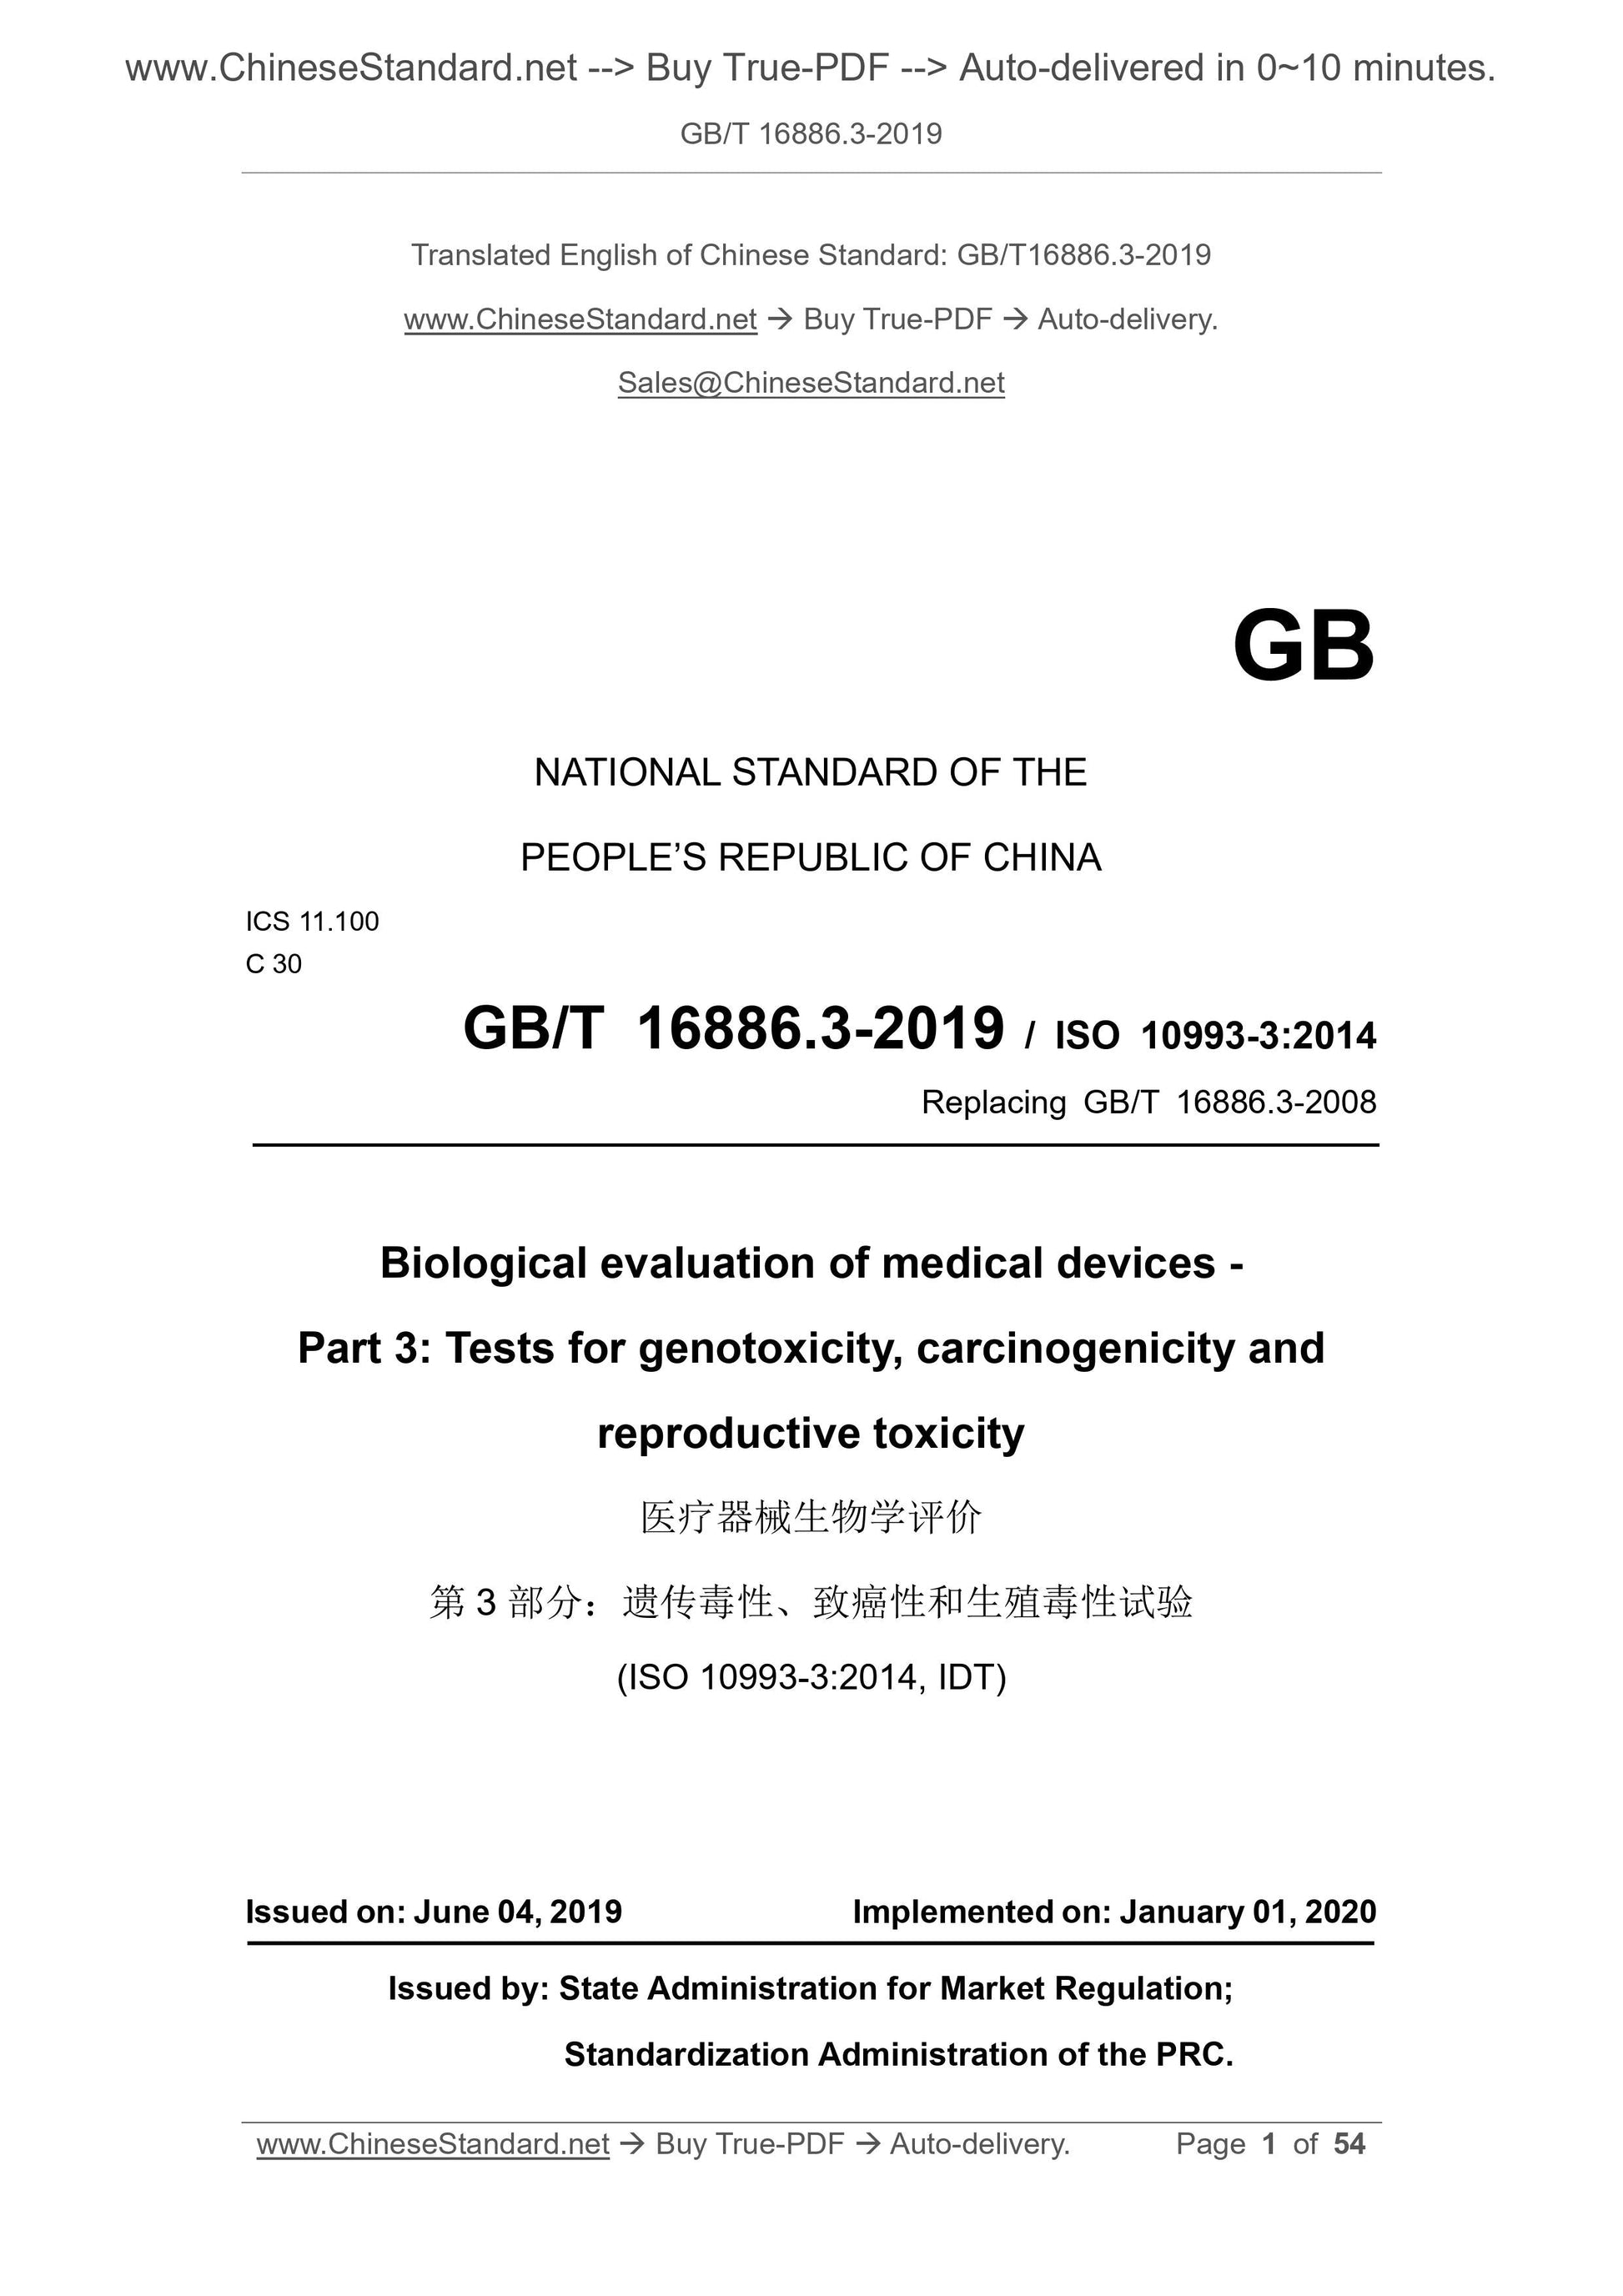 GB/T 16886.3-2019 Page 1